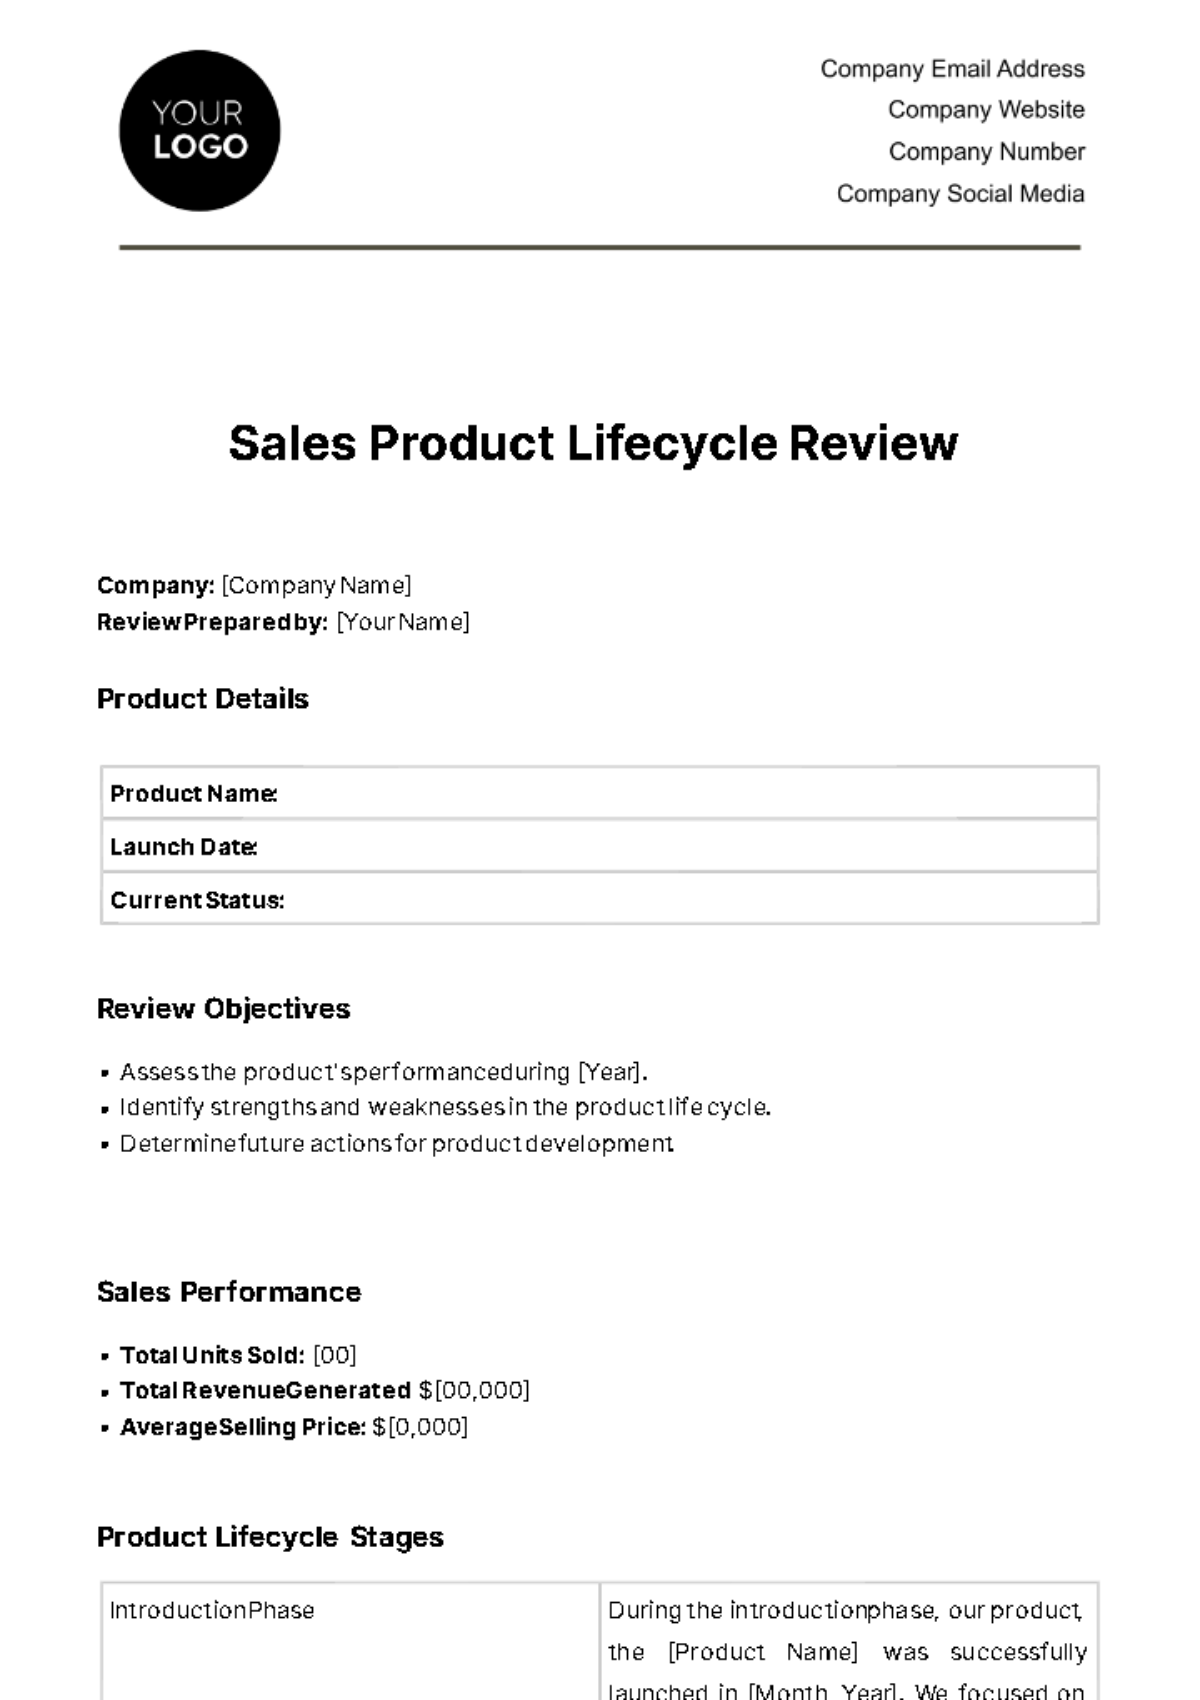 Free Sales Product Lifecycle Review Template